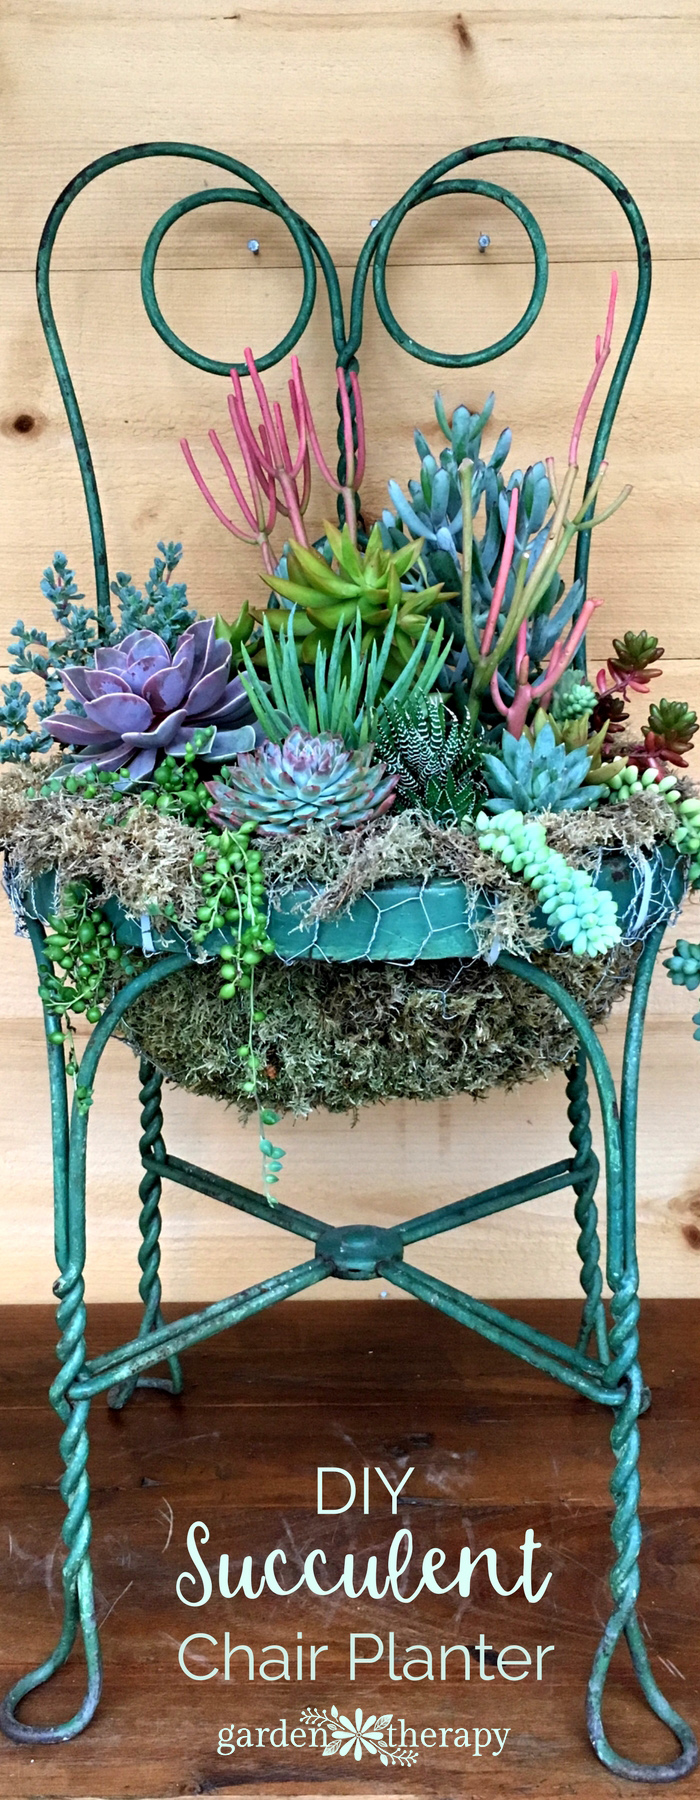 How to Make a DIY Succulent Chair Planter